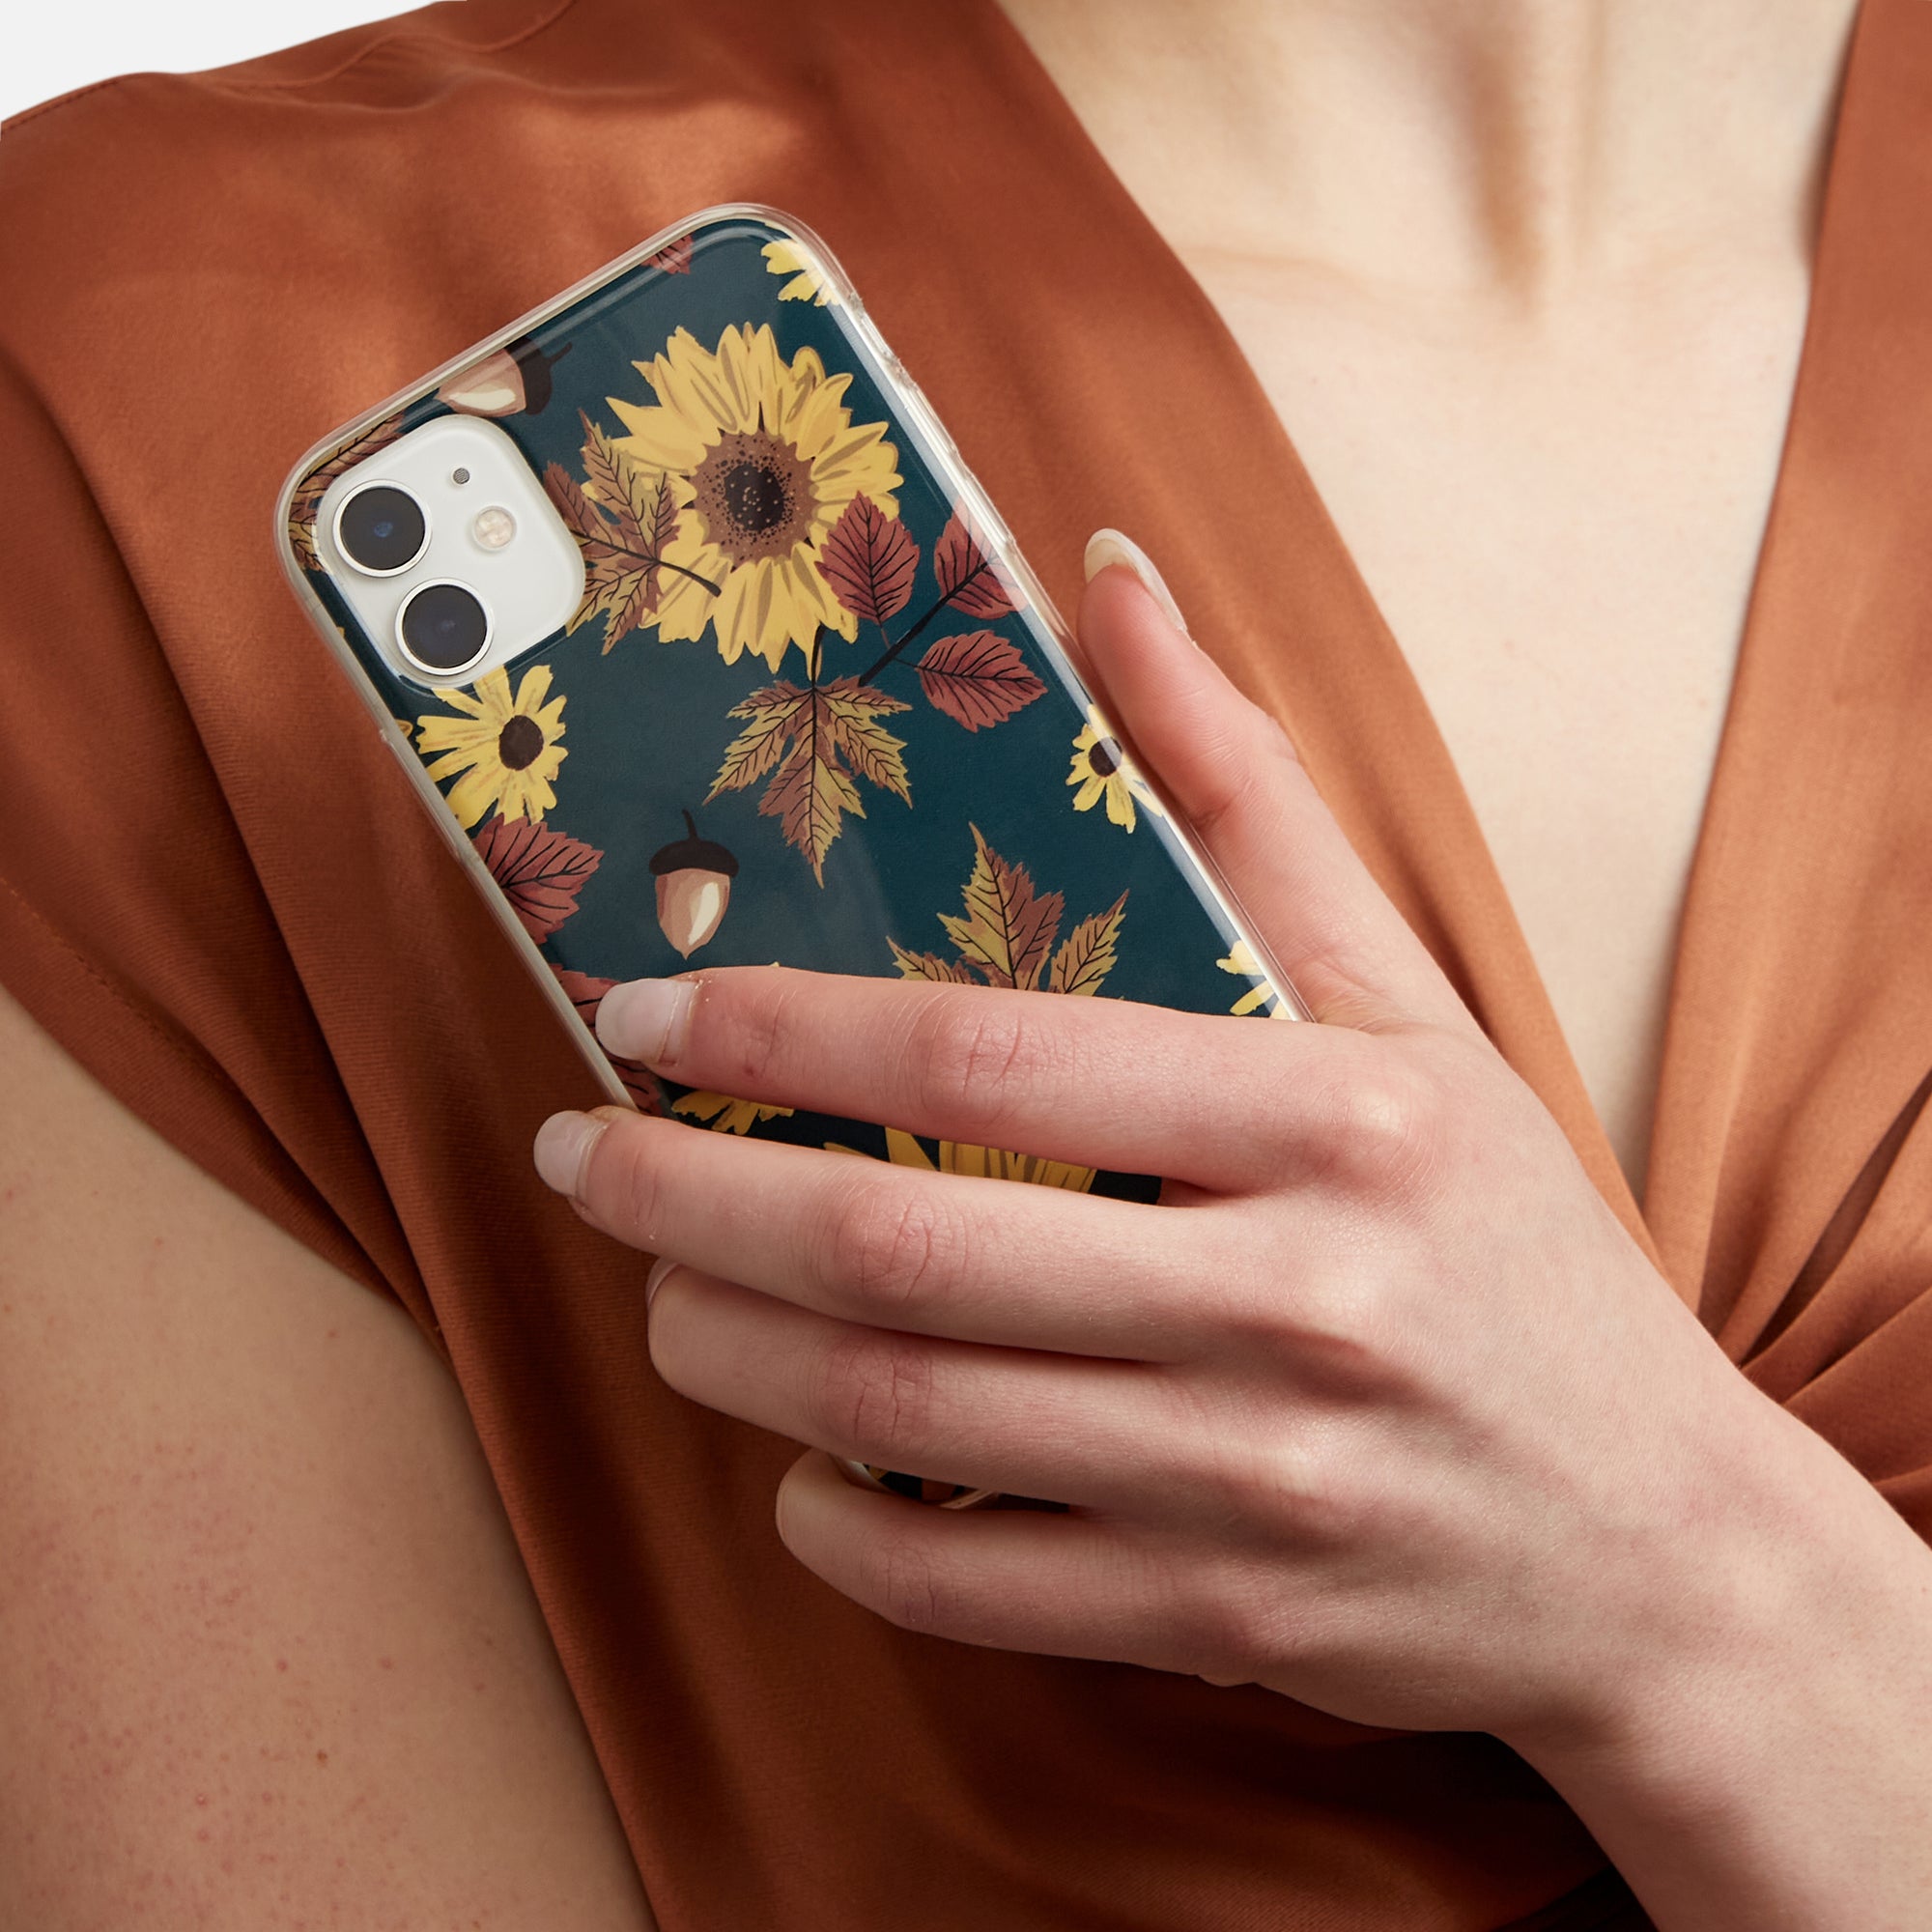 iPhone case with fall flowers